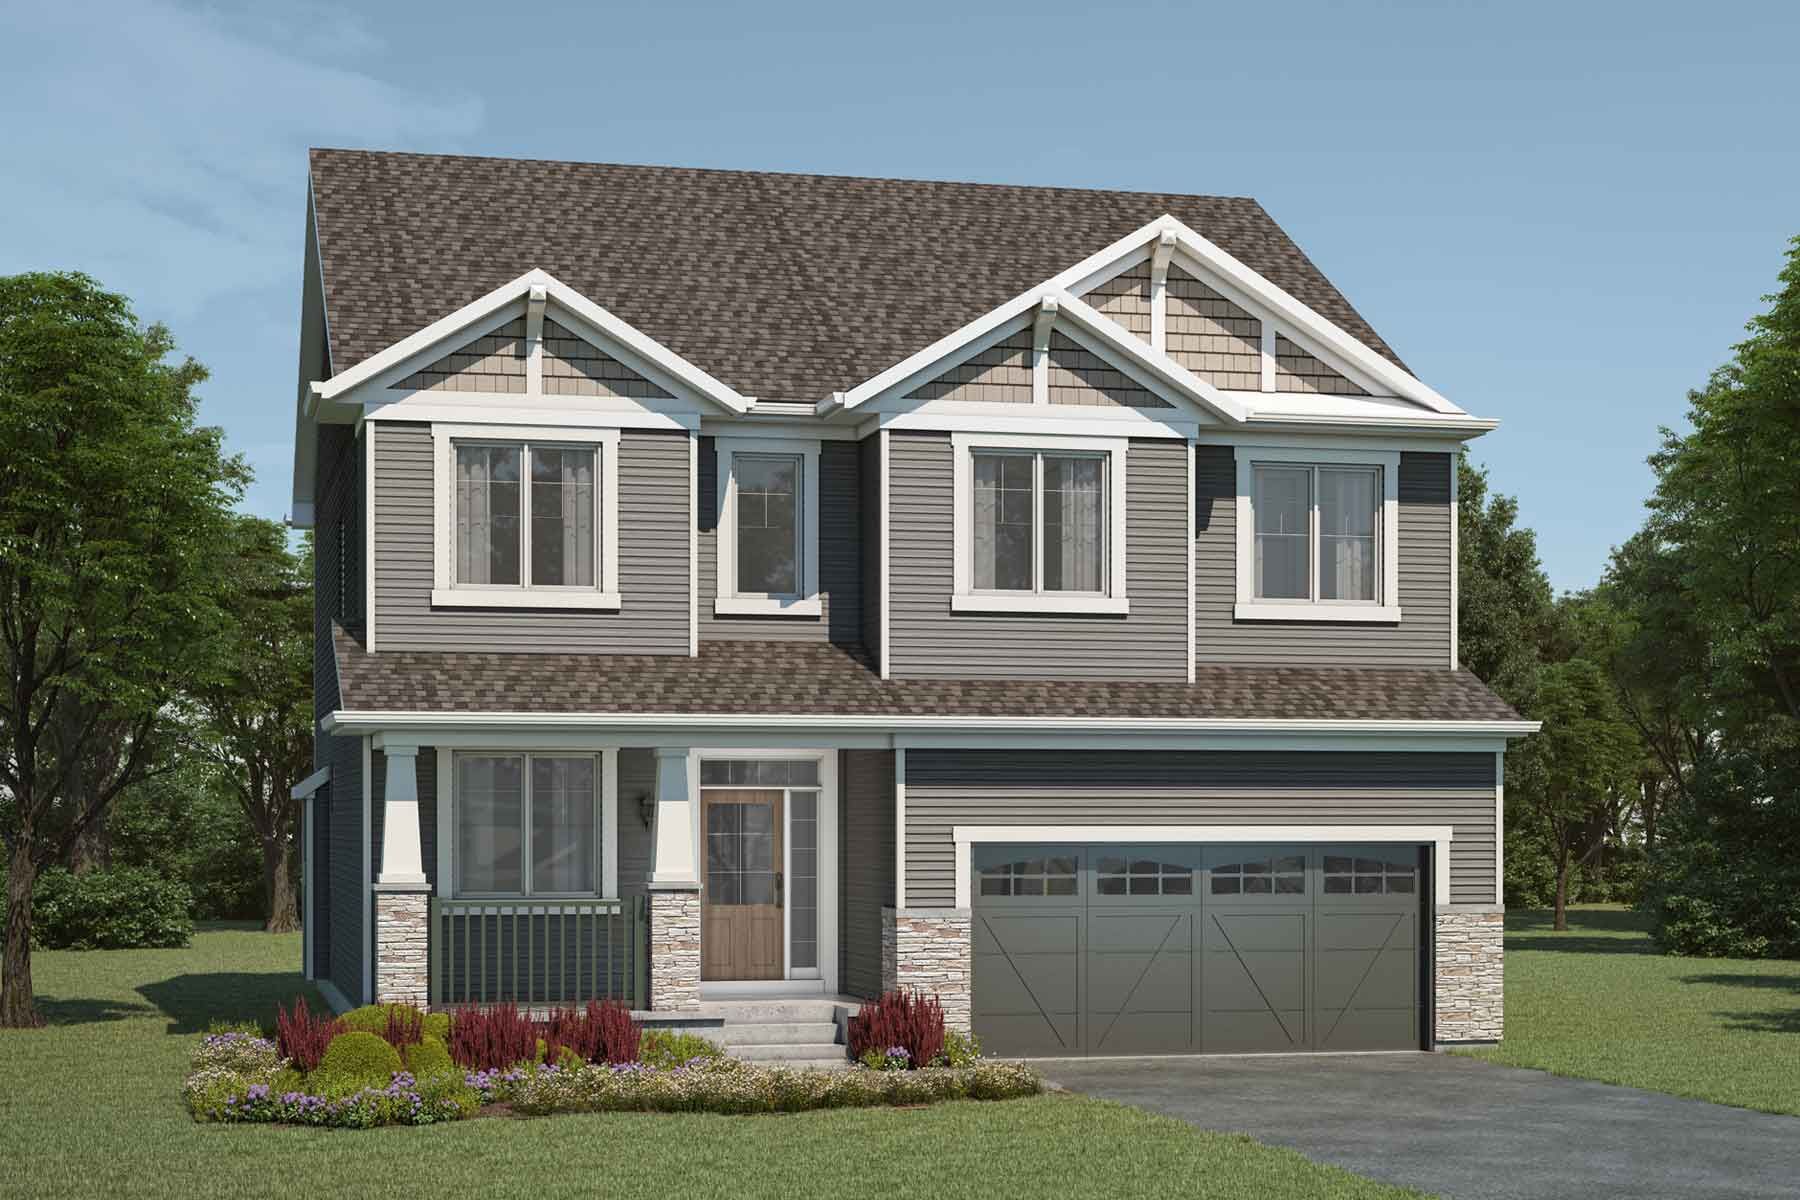 A Craftsman style detached home with a double car garage.